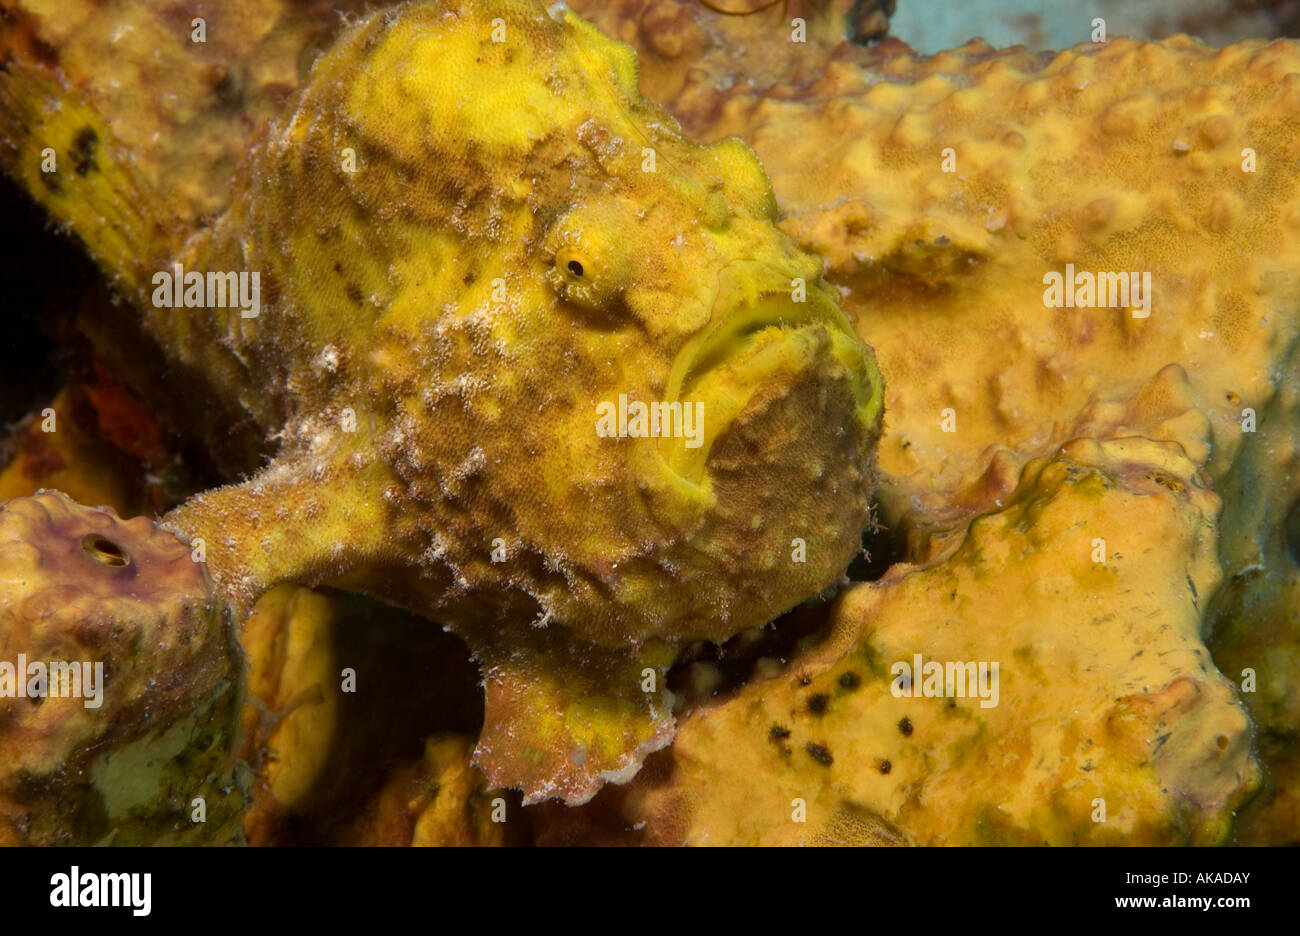 A longlure frogfish (Antennarius multiocellatus) blends in with the coloring of a yellow sponge. Stock Photo